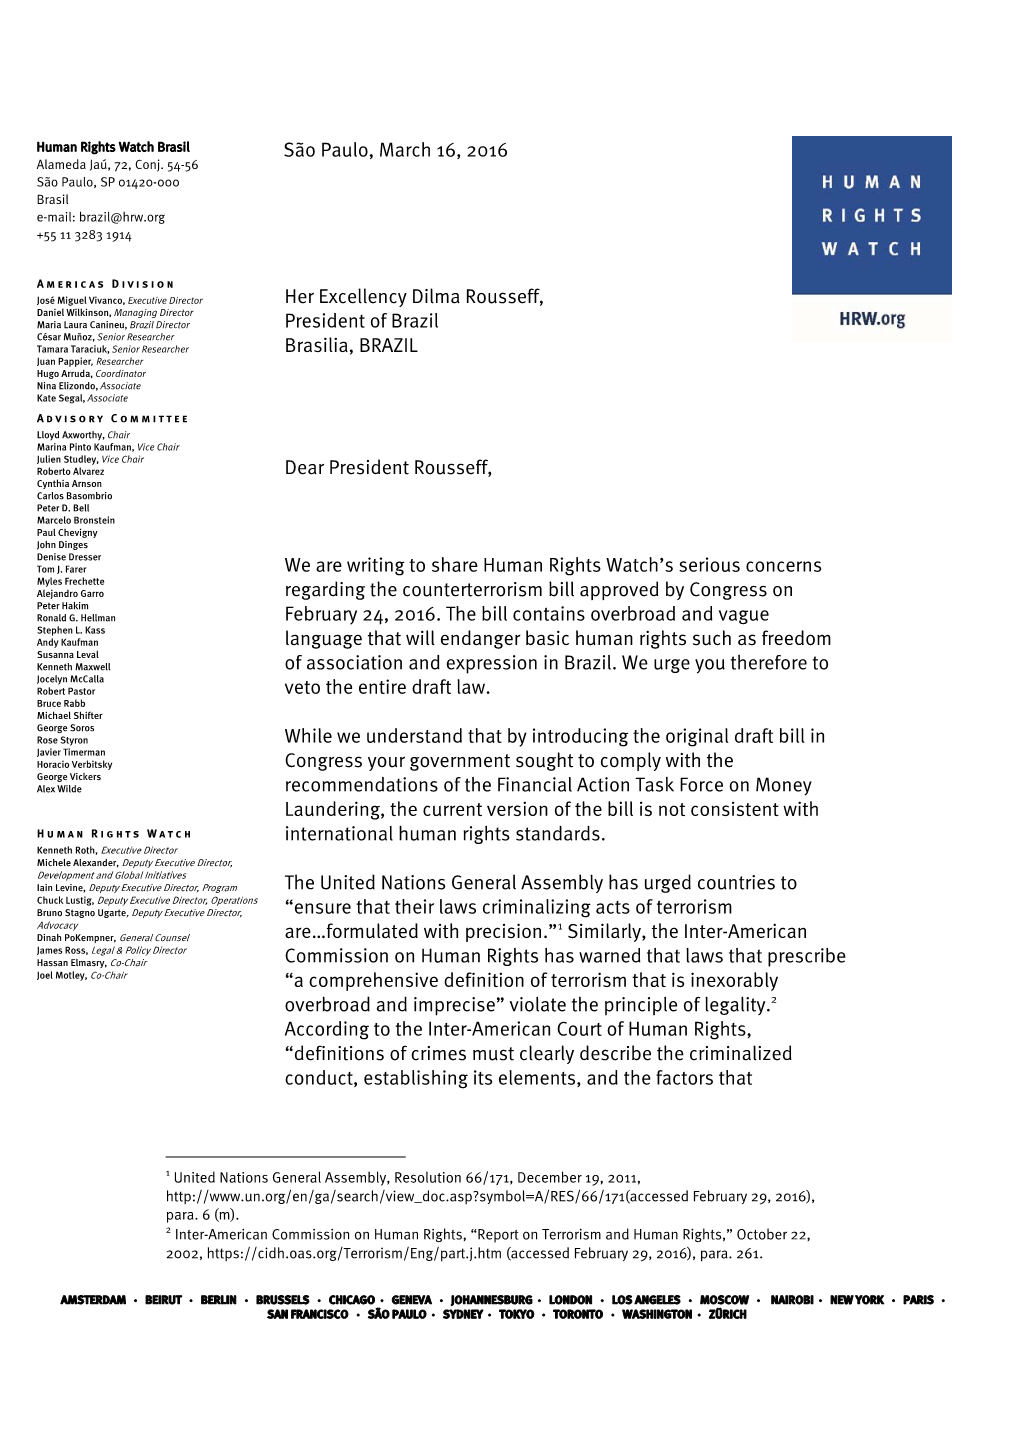 Download Letter to President Dilma Rousseff on Counterterrorism Bill